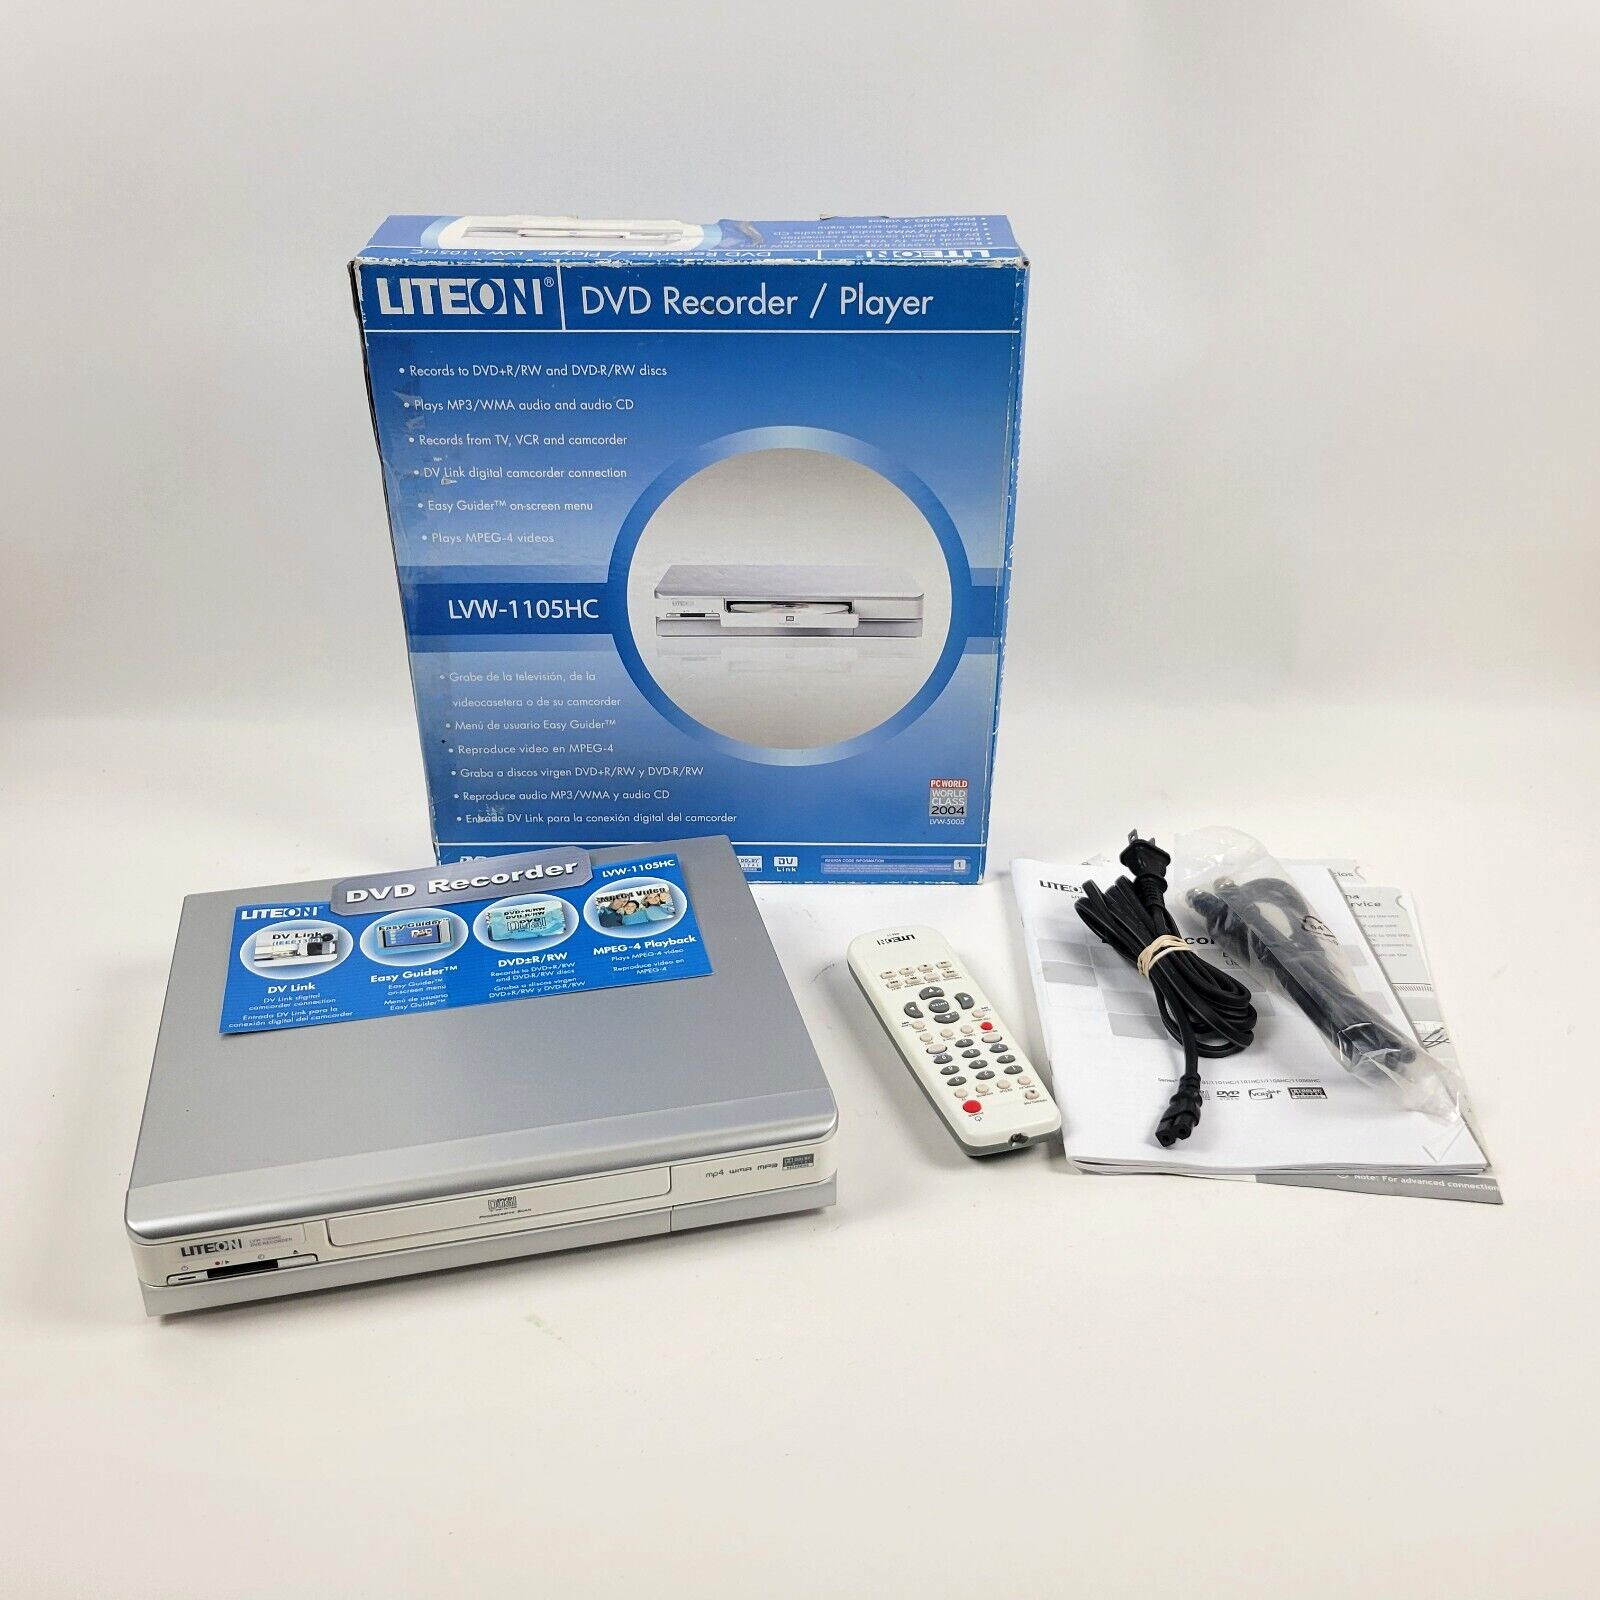 Lite On LiteON DVD Recorder-Player LVW-1105HC Tested And Working 